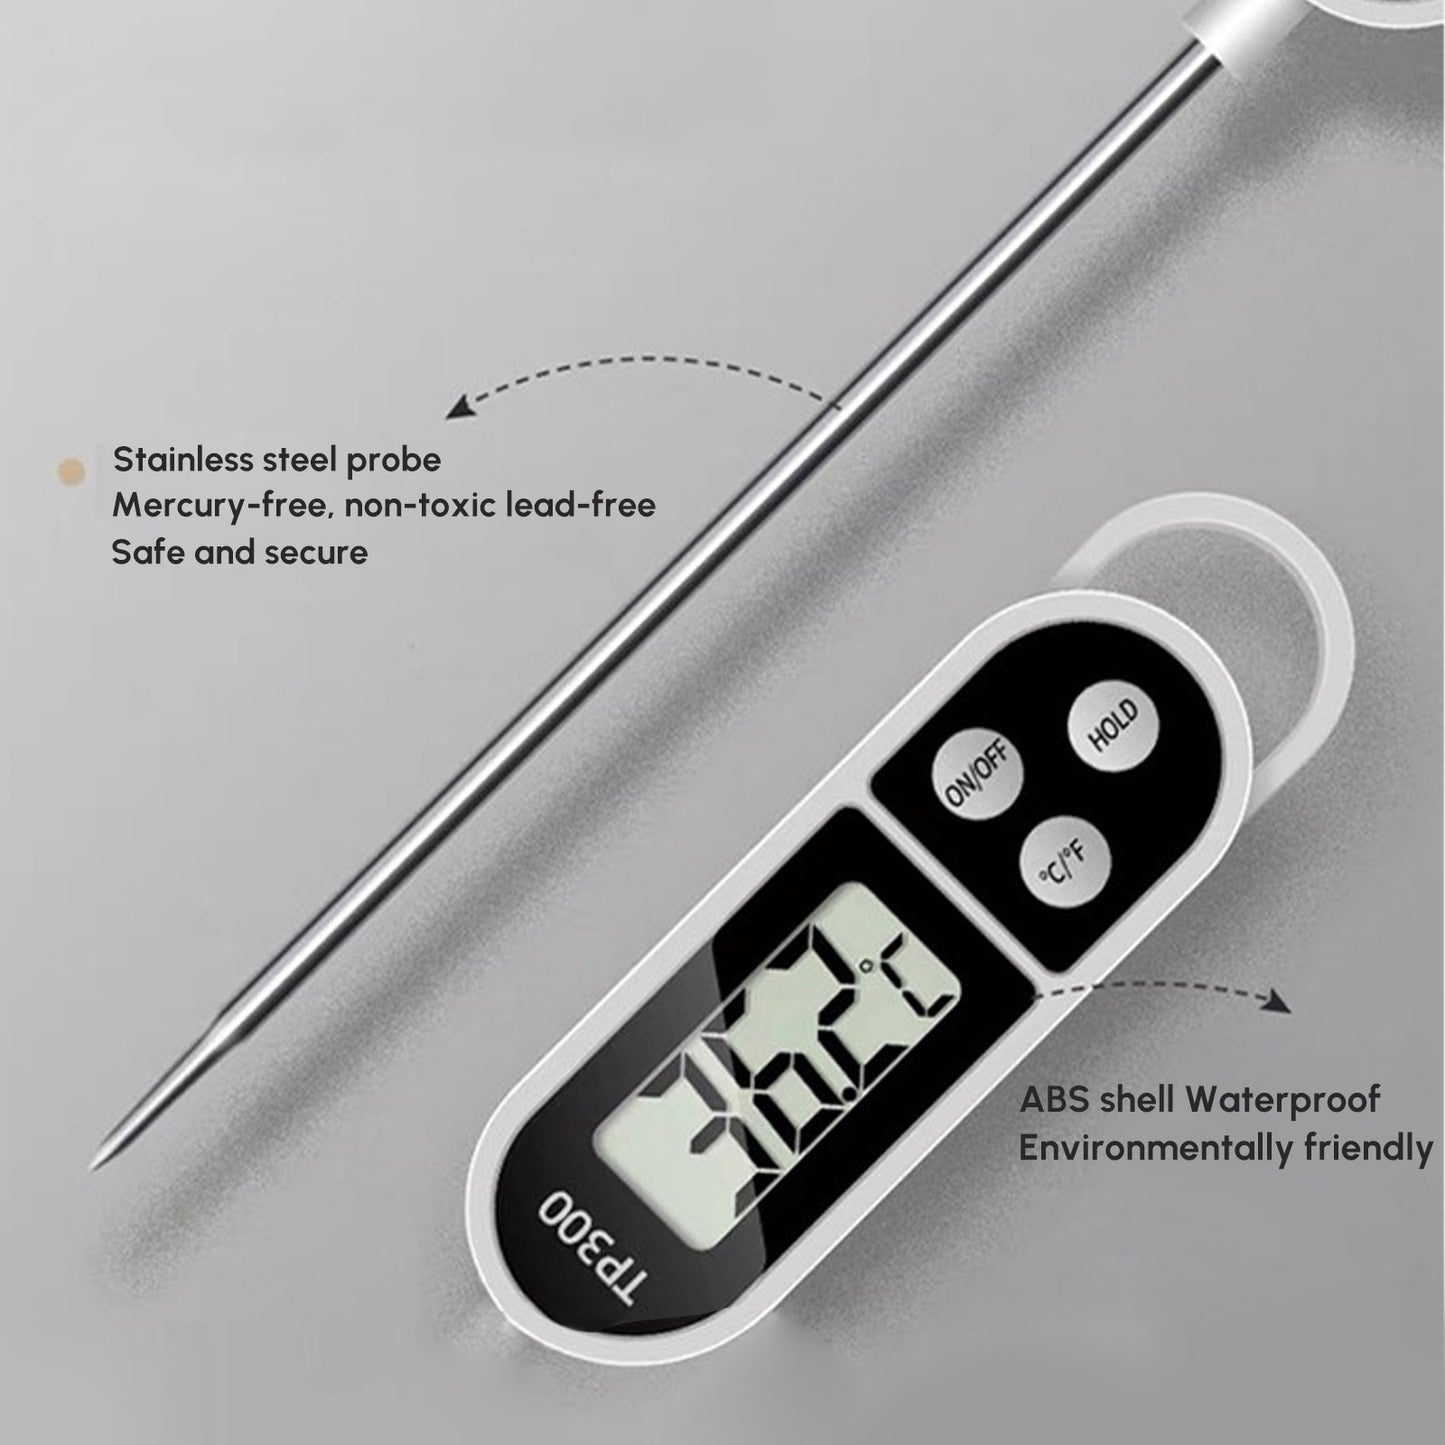 Instant Read Digital Grill Kitchen Meat Thermometer Probe BBQ Oven